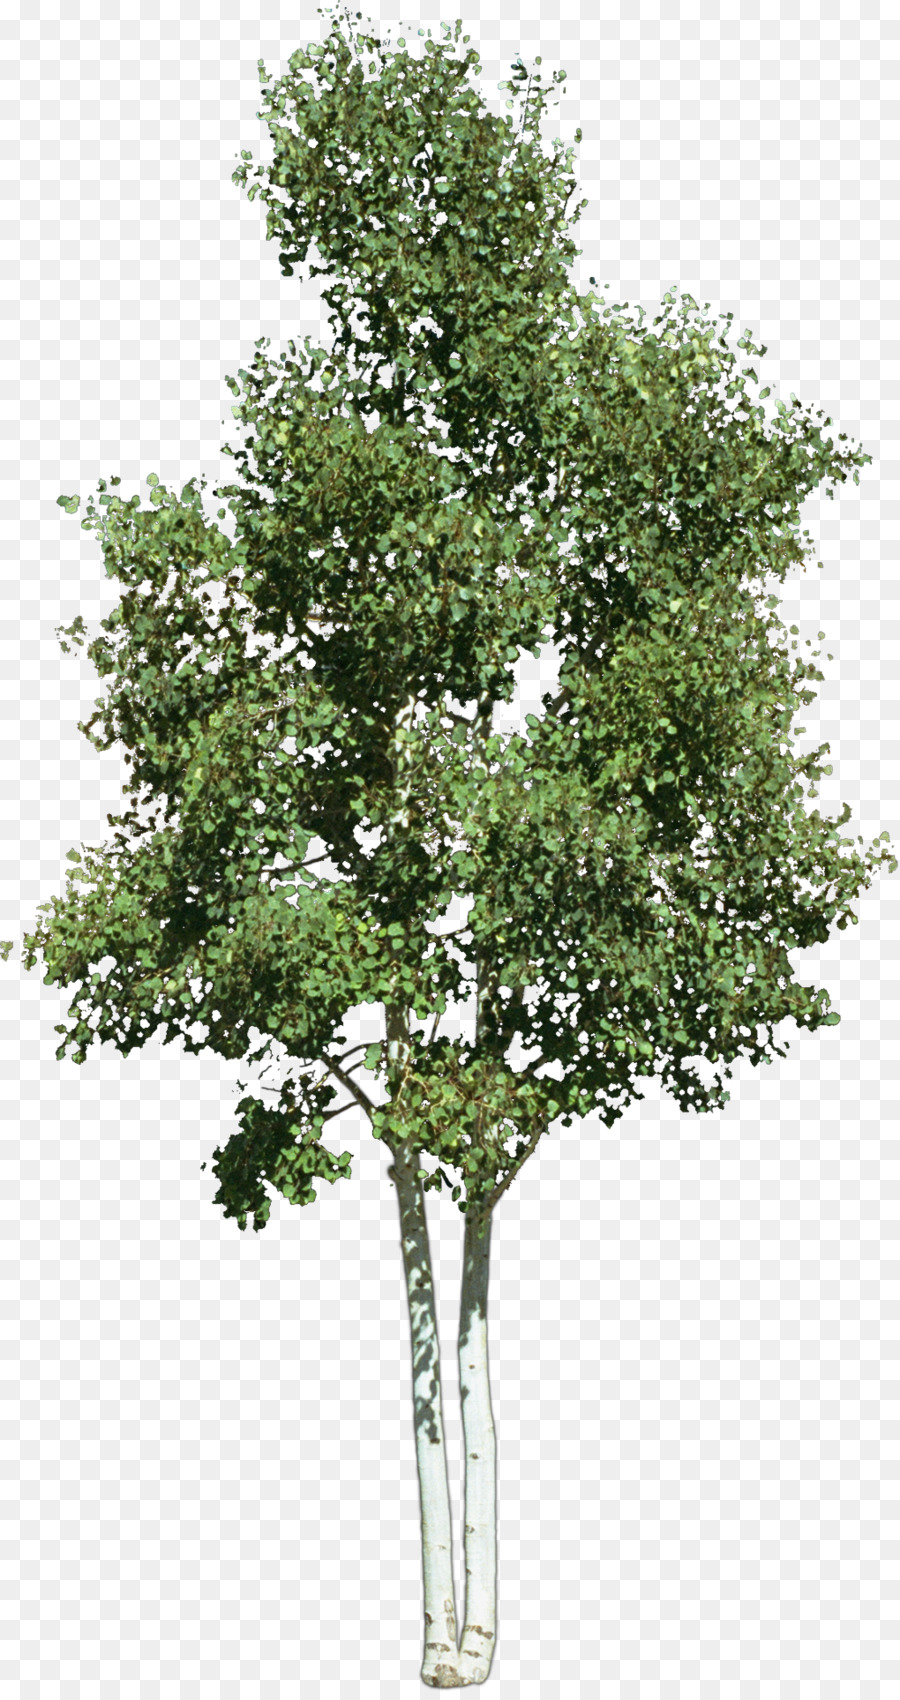 Look at trees Clip art - bushes png download - 1020*1918 - Free Transparent Tree png Download.